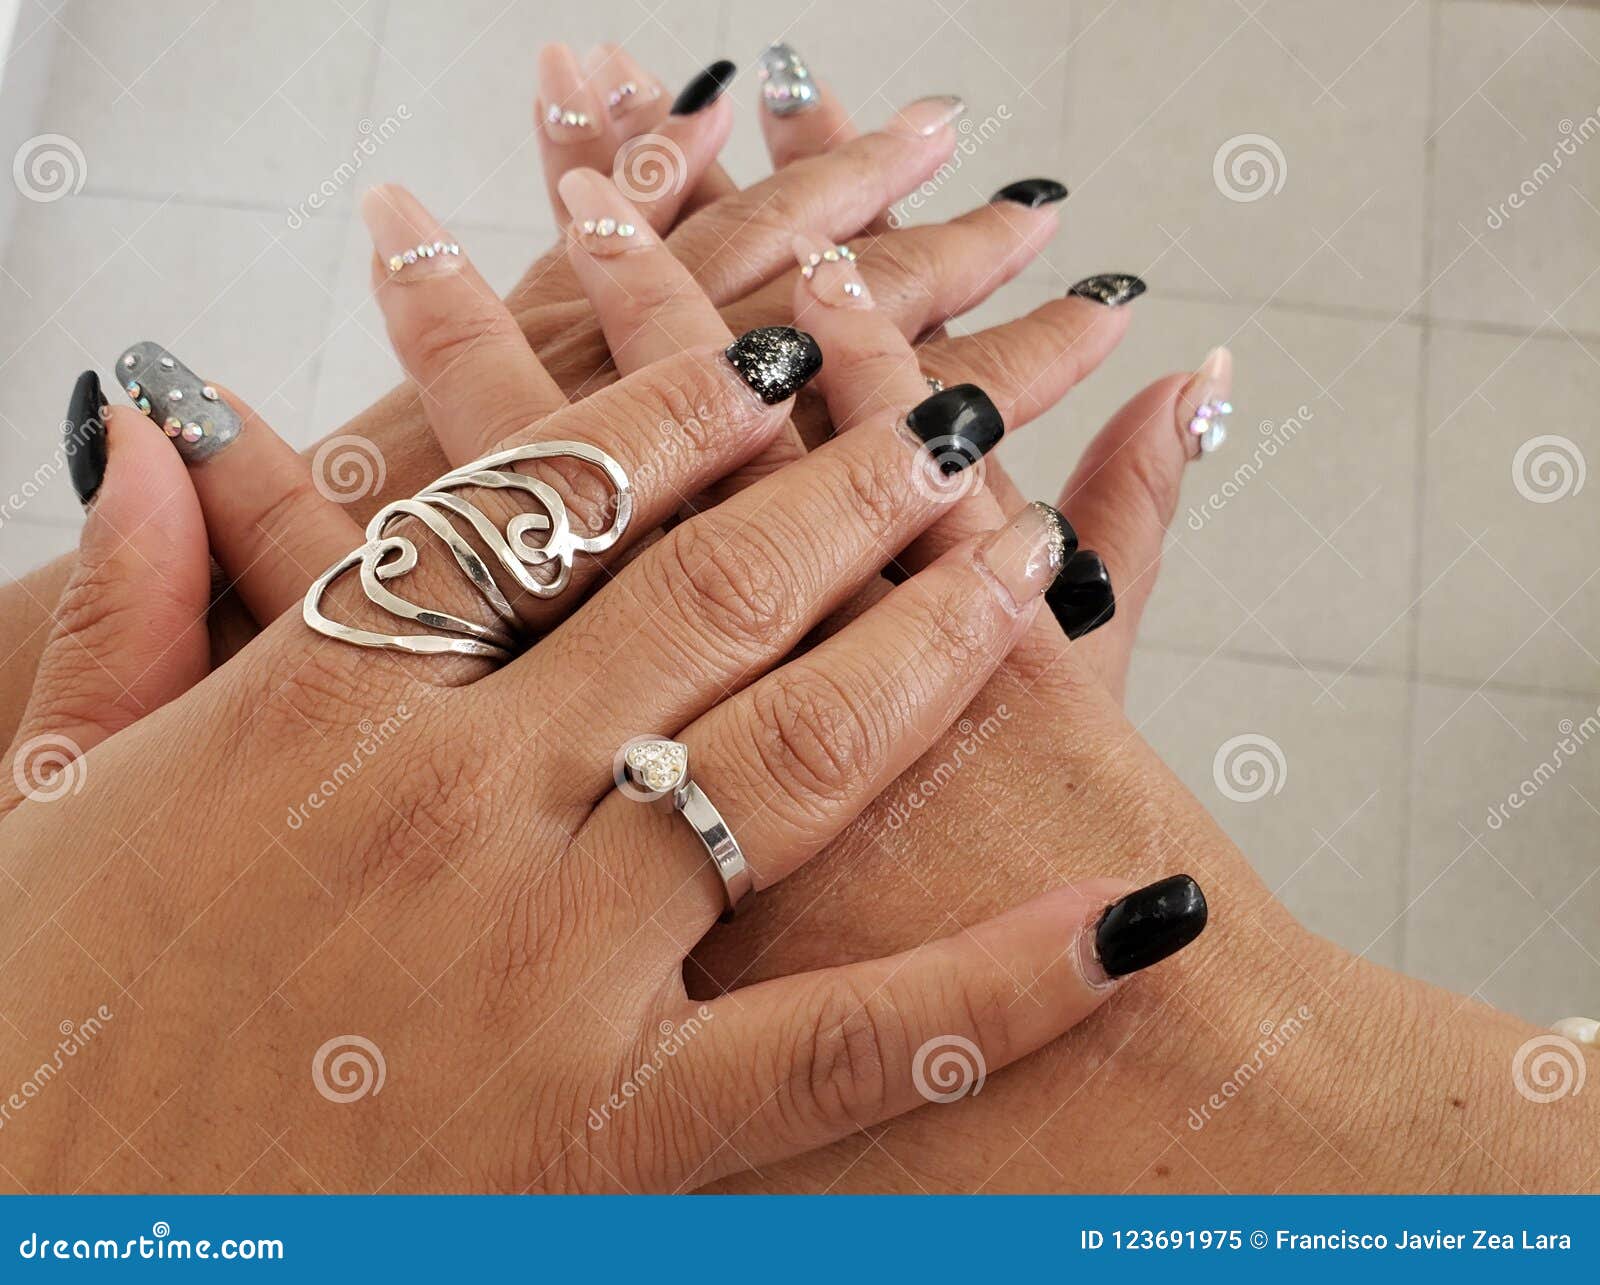 hands of two women together as a token of love